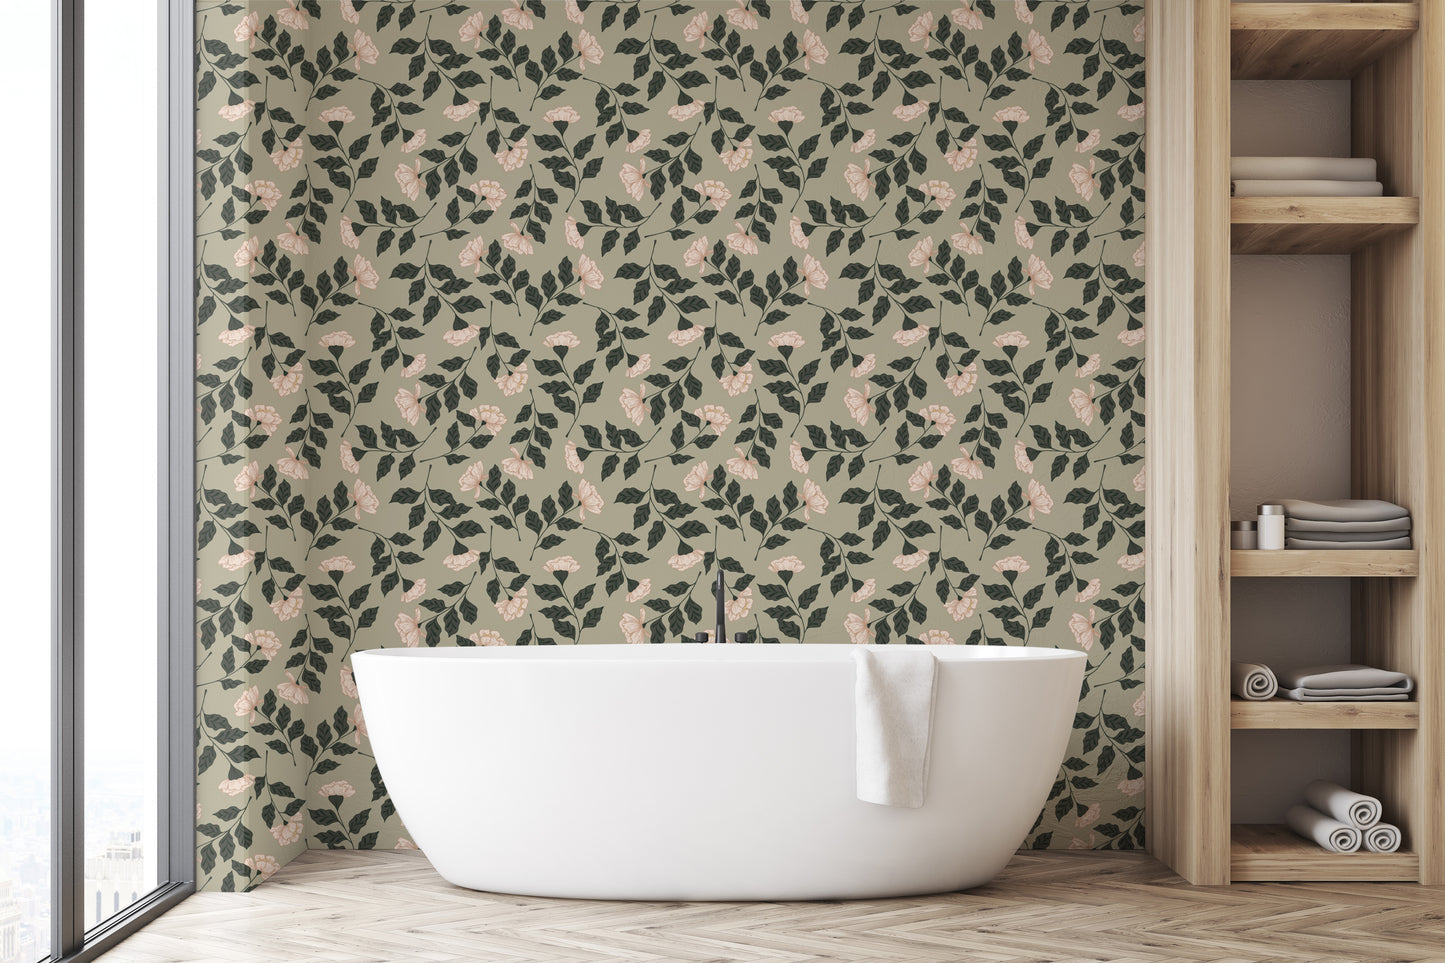 Ellie Wallpaper (Fern) from The Wynona Collection